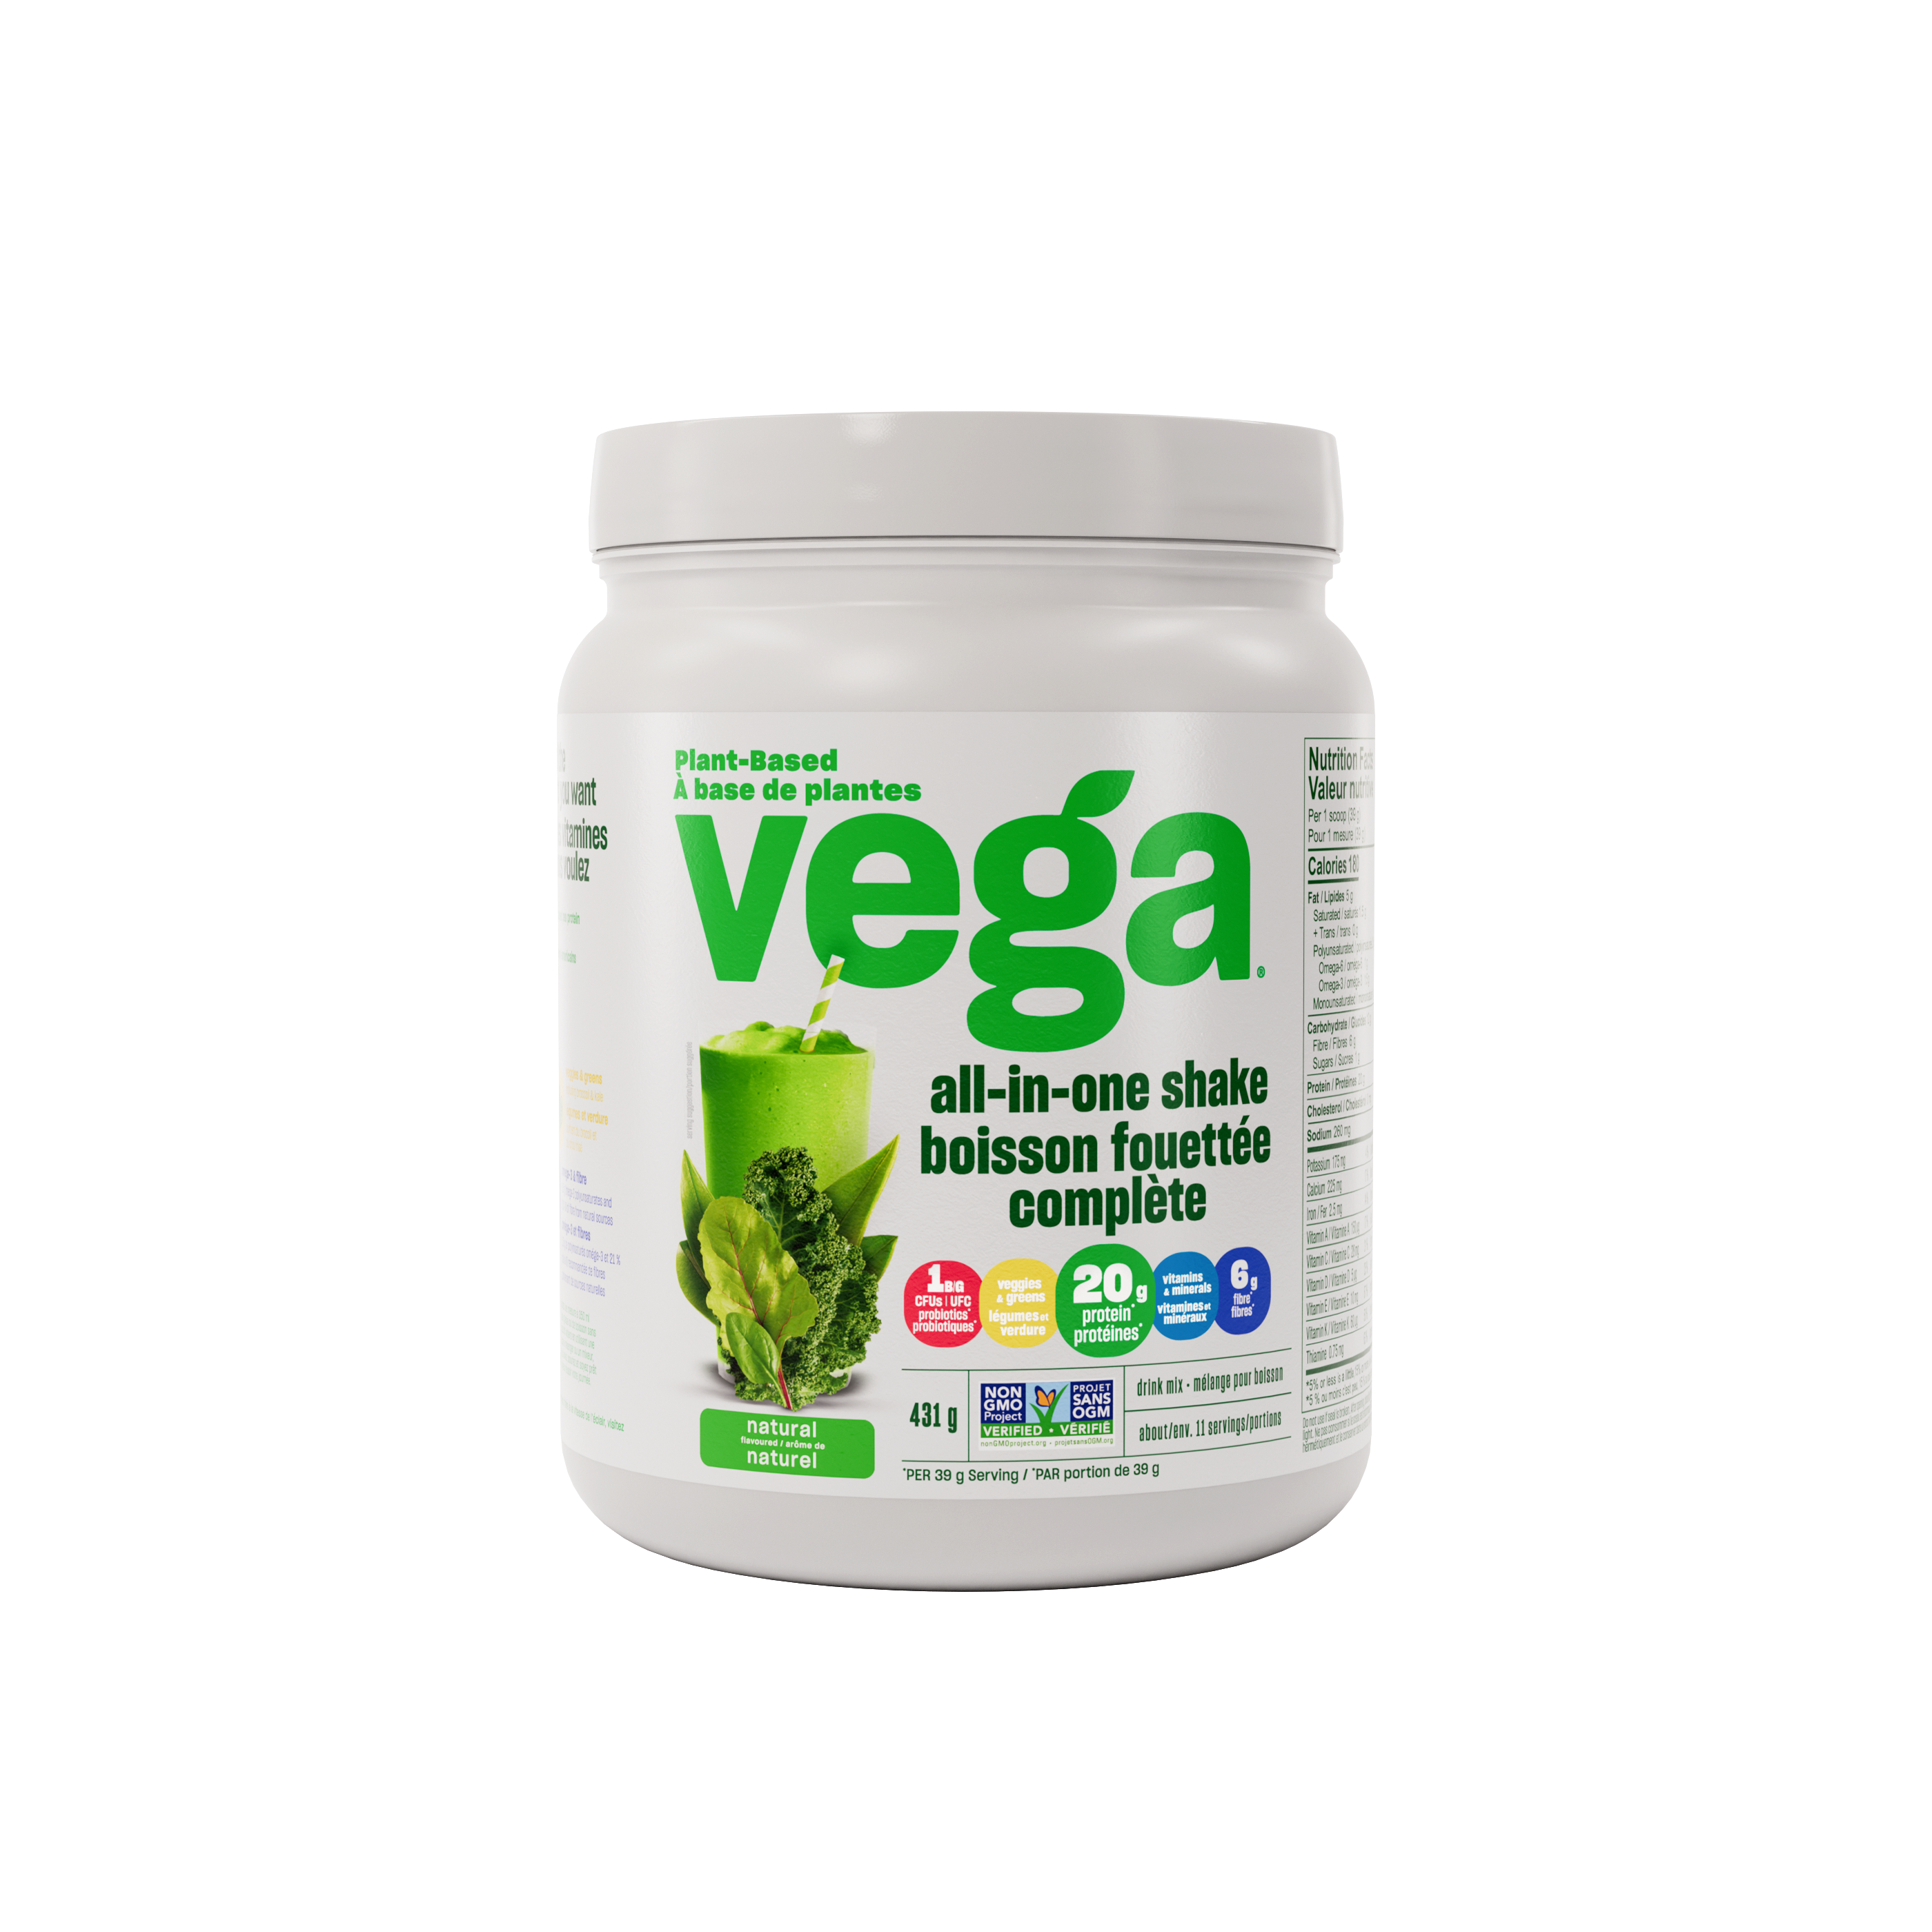 Vega One® All-in-One Shake - Plant-Based Protein Powder